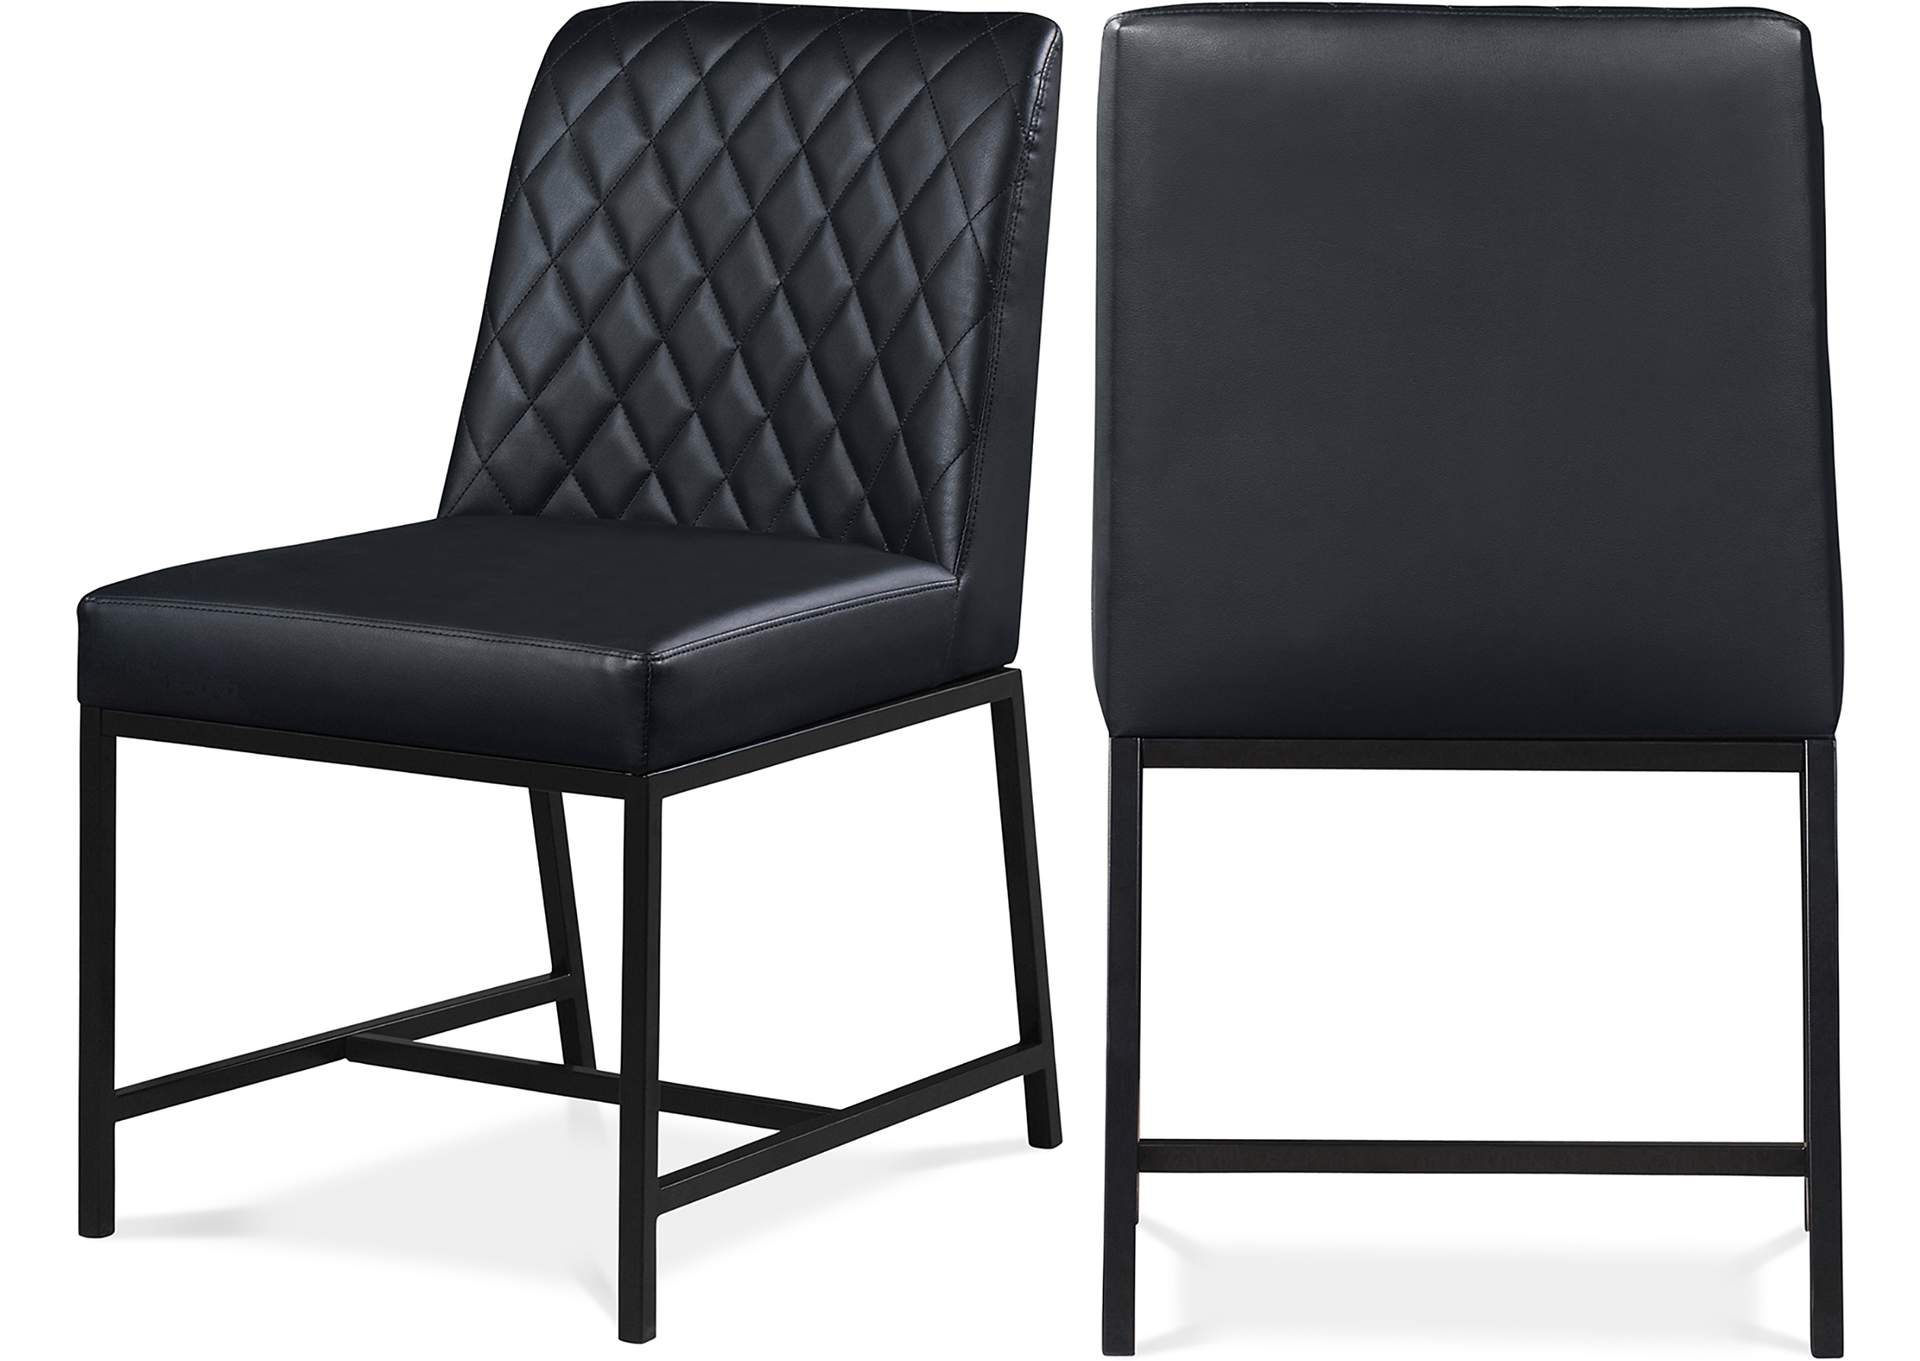 Bryce Black Faux Leather Dining Chairs, Faux Leather Dining Set